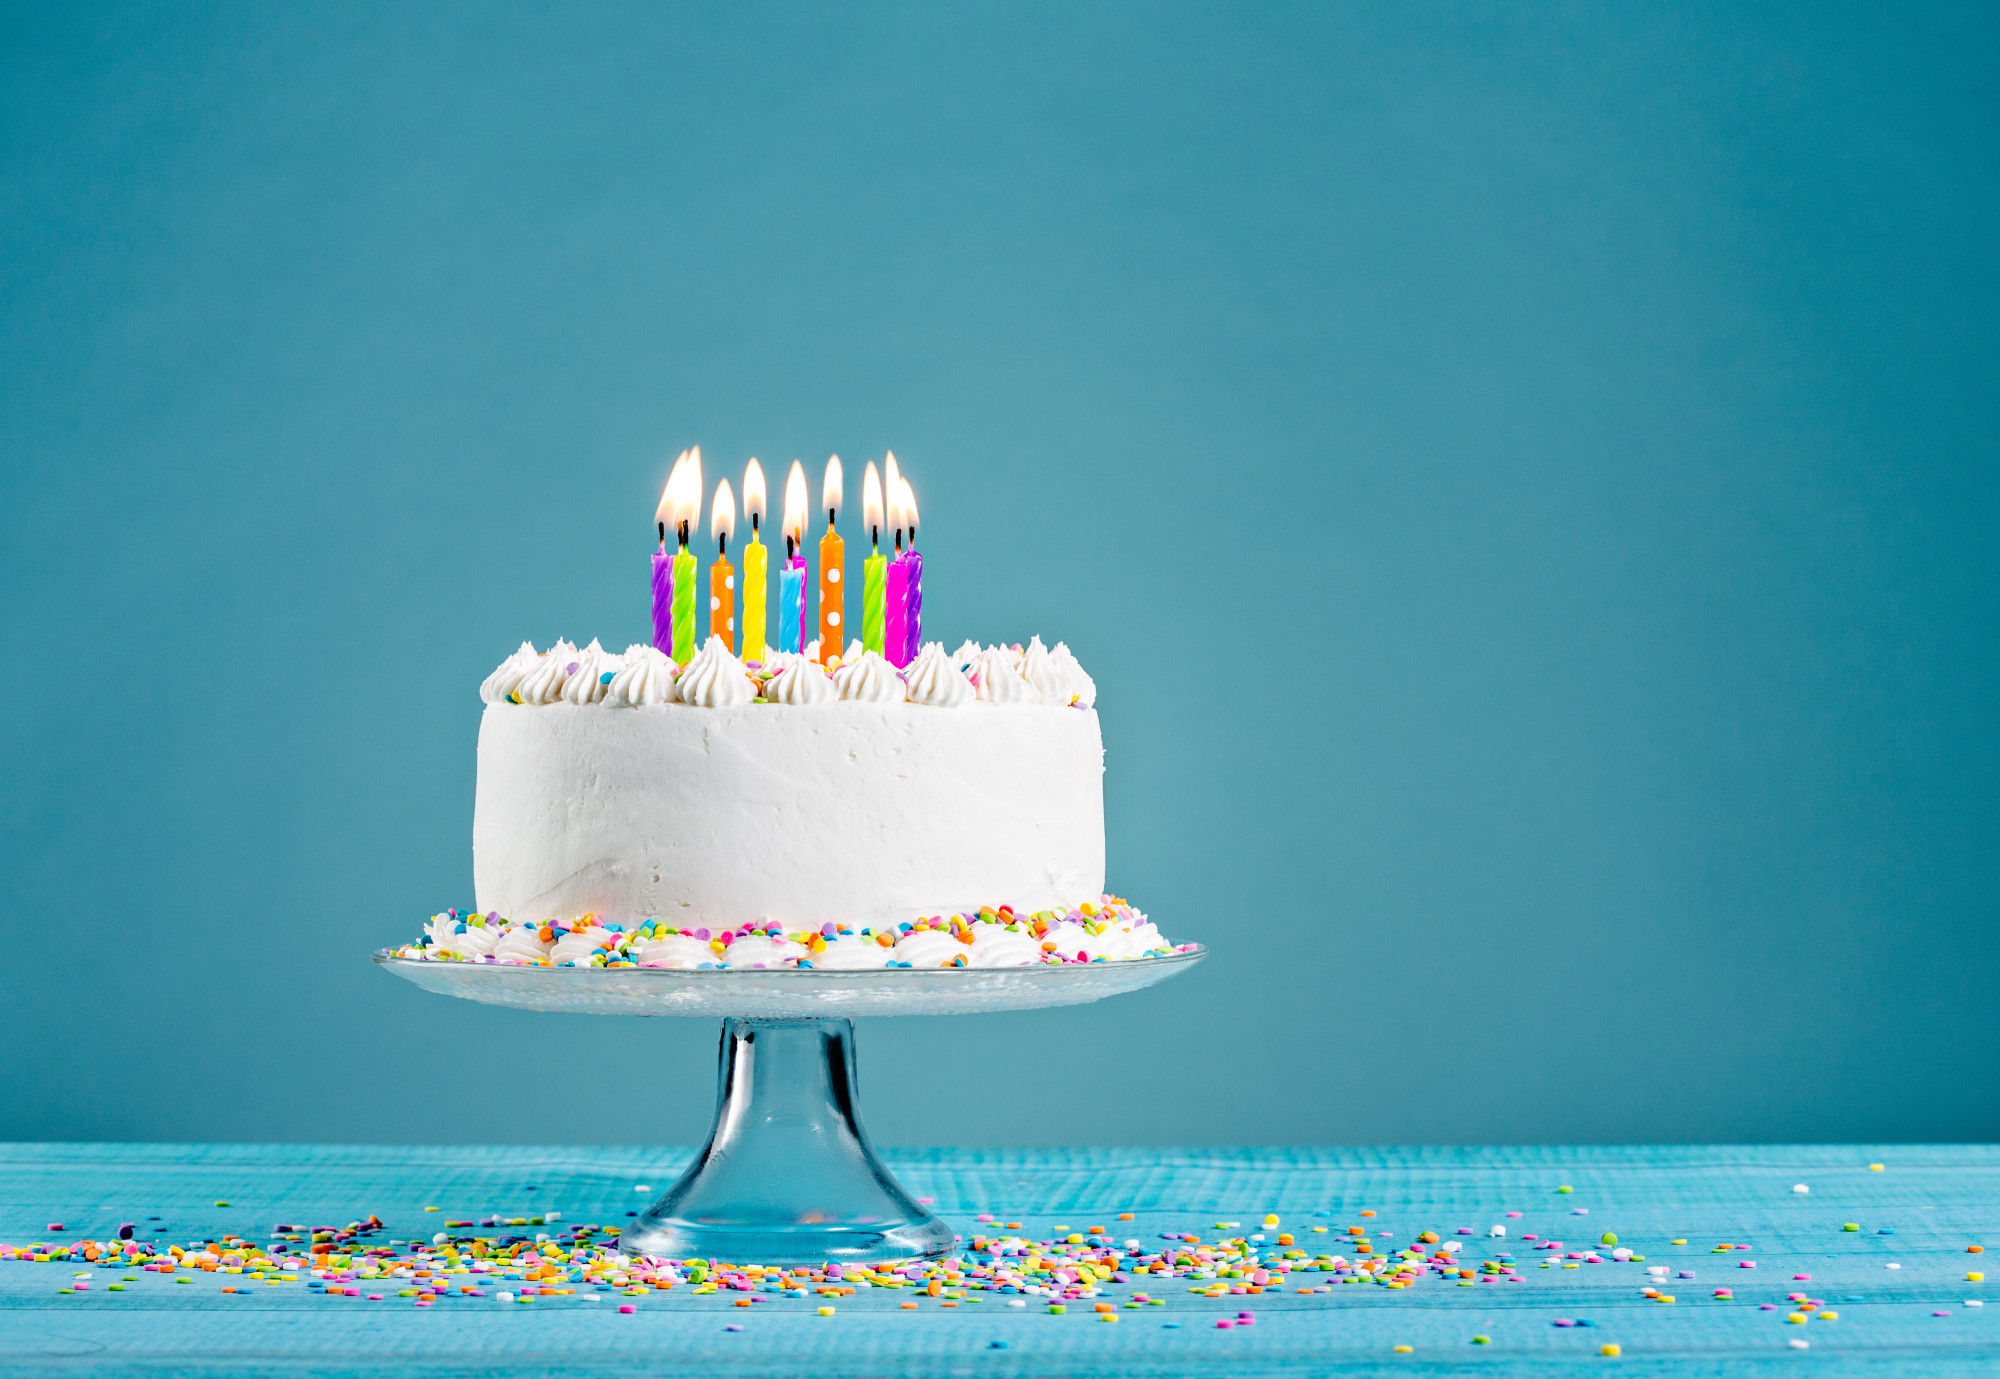 Unique Things to Do on Your Birthday